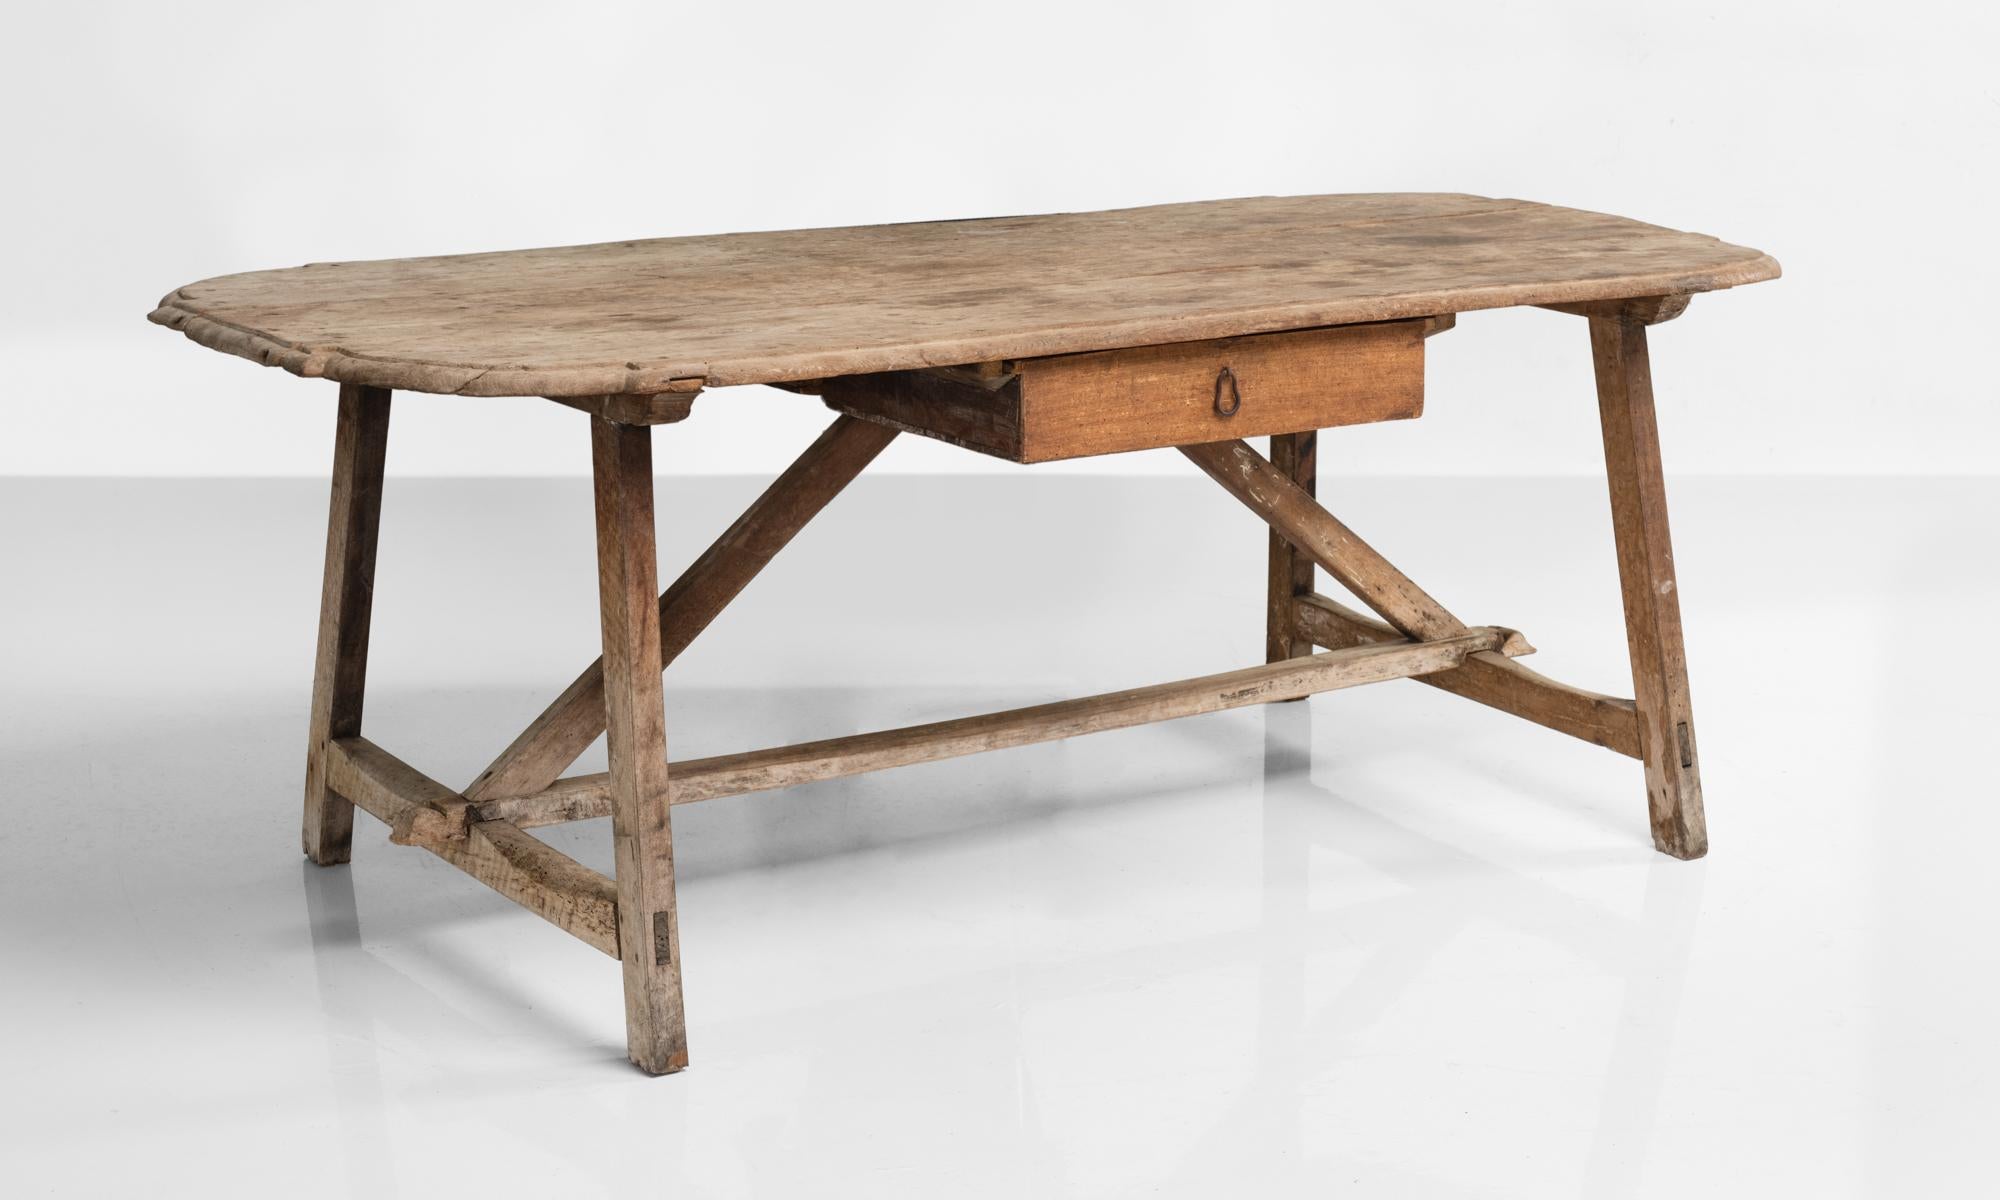 Primitive oval table, Italy, 18th century

Rustic construction with single pull drawer.